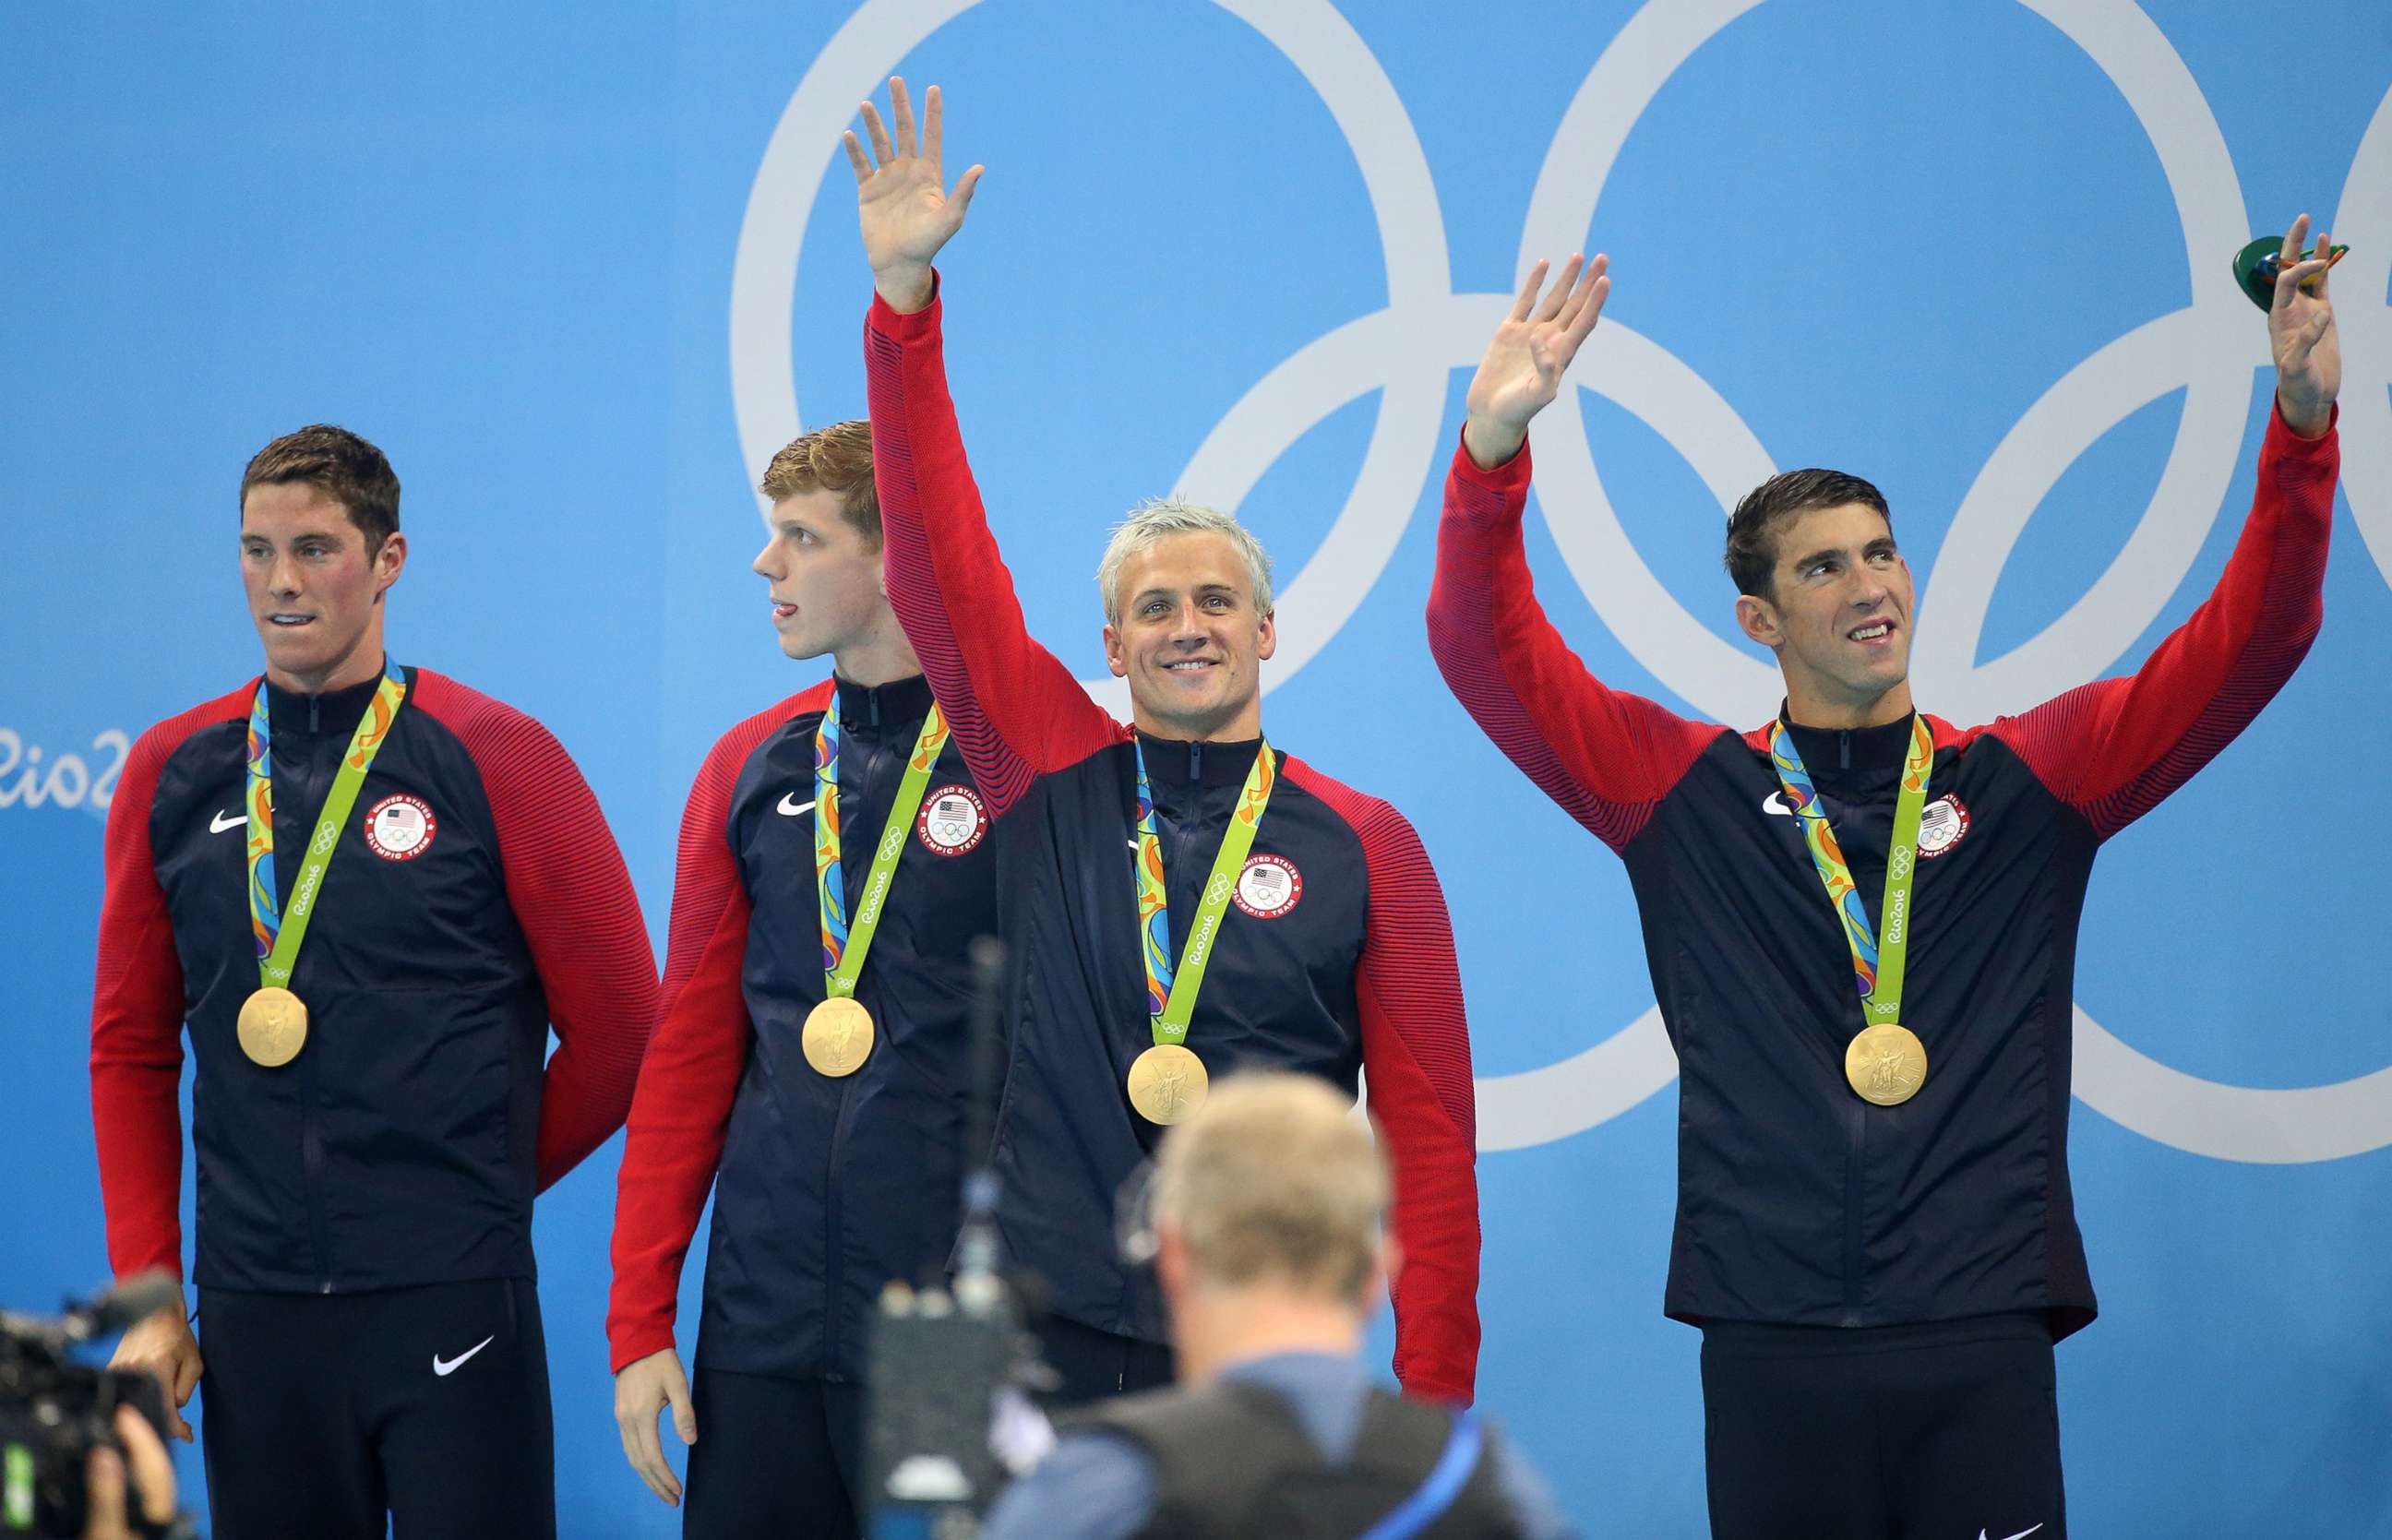 PHOTO: Team USA celebrates winning the gold medal during the medal ceremony of the men's 200m freestyle relay at Olympic Aquatics Stadium on Aug. 9, 2016 in Rio de Janeiro, Brazil.